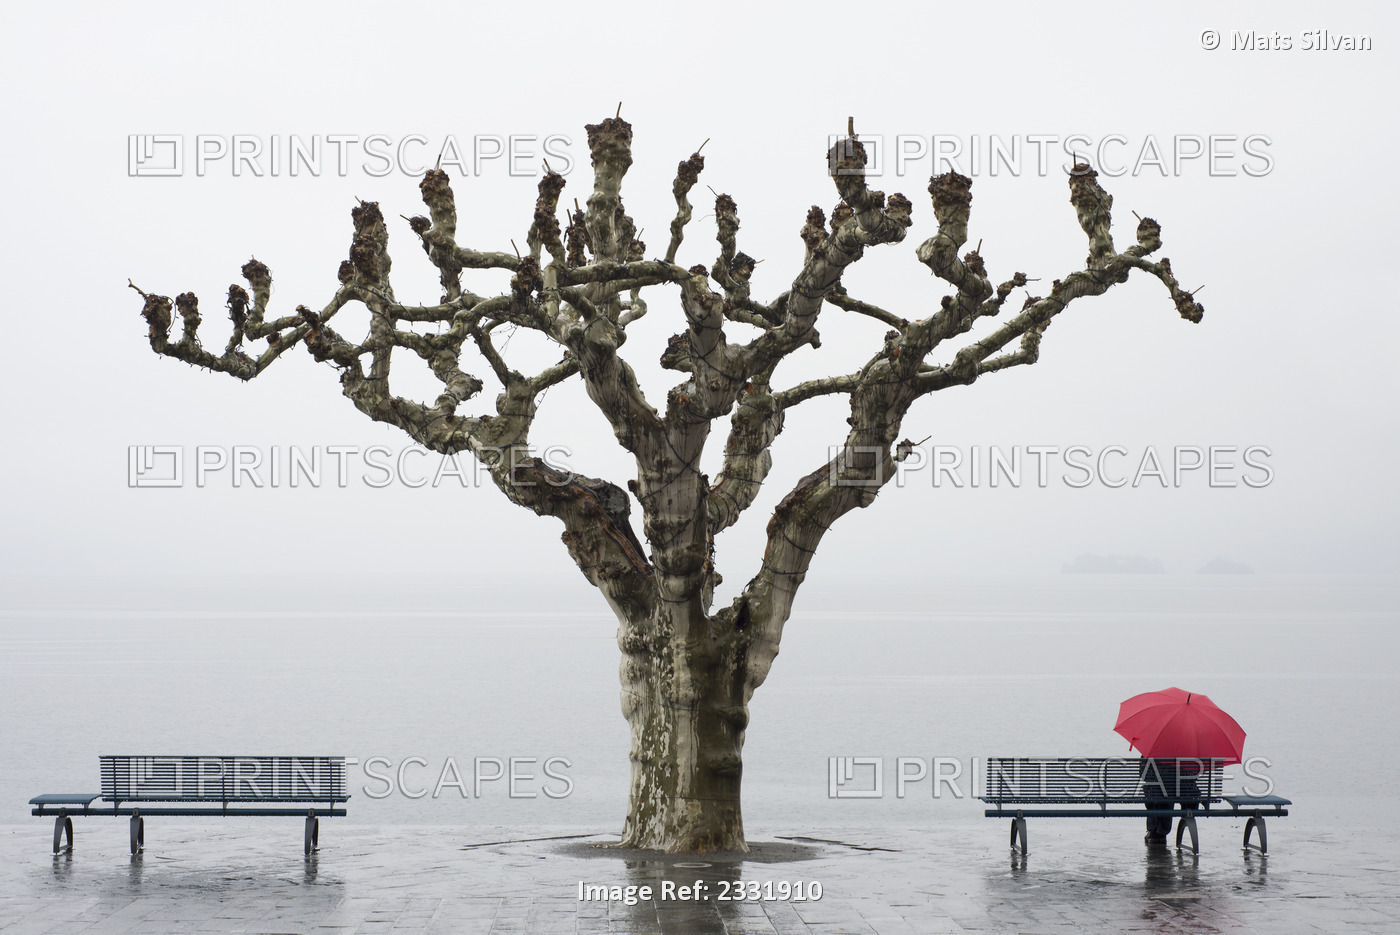 A tree and a person with a red umbrella at the water's edge;Ascona ticino ...